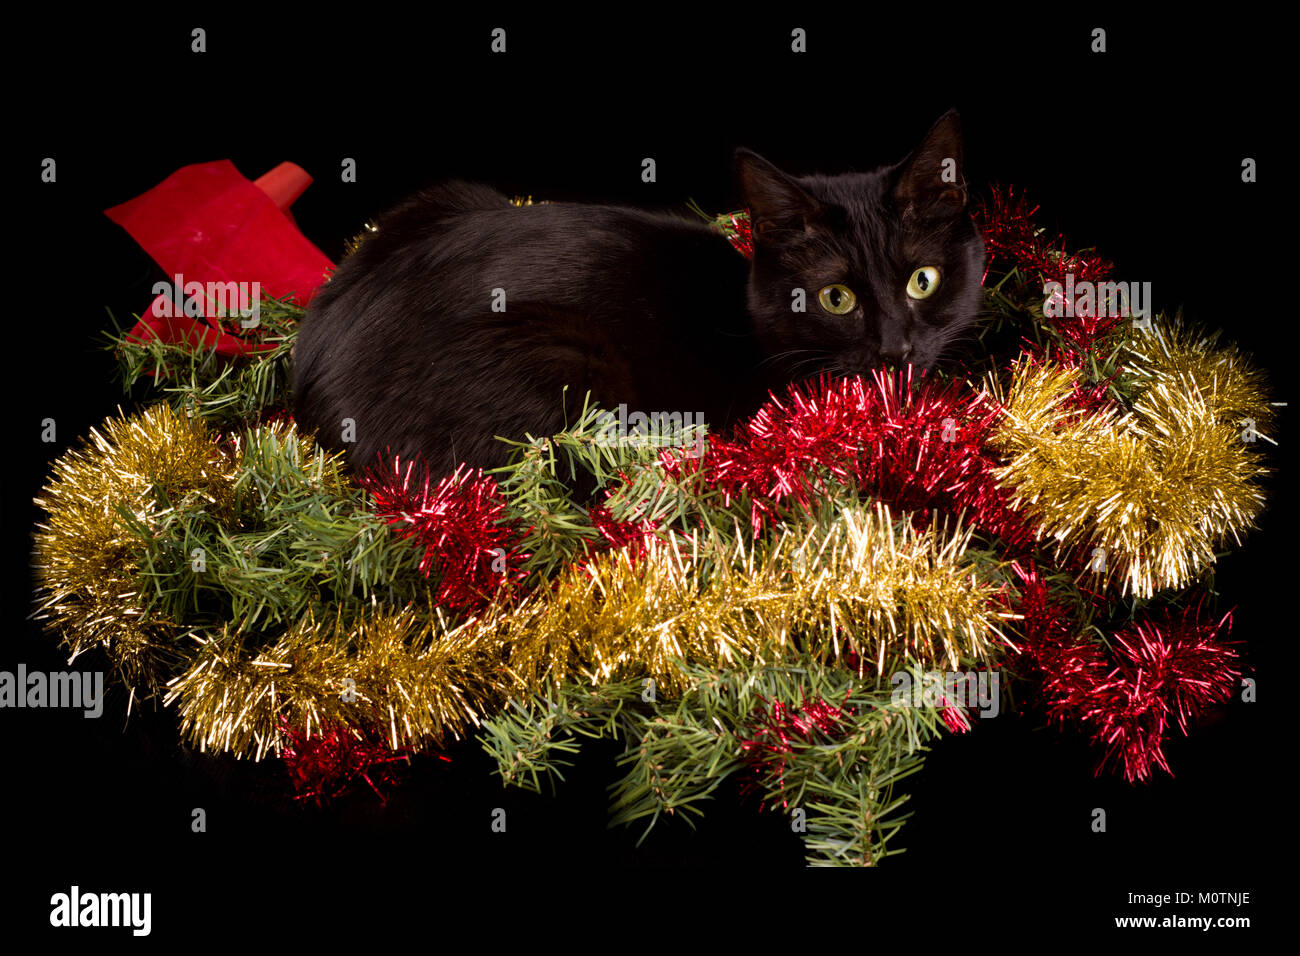 Black cat hiding in Christmas decorations, wreath with red and gold tinsel, on black background Stock Photo